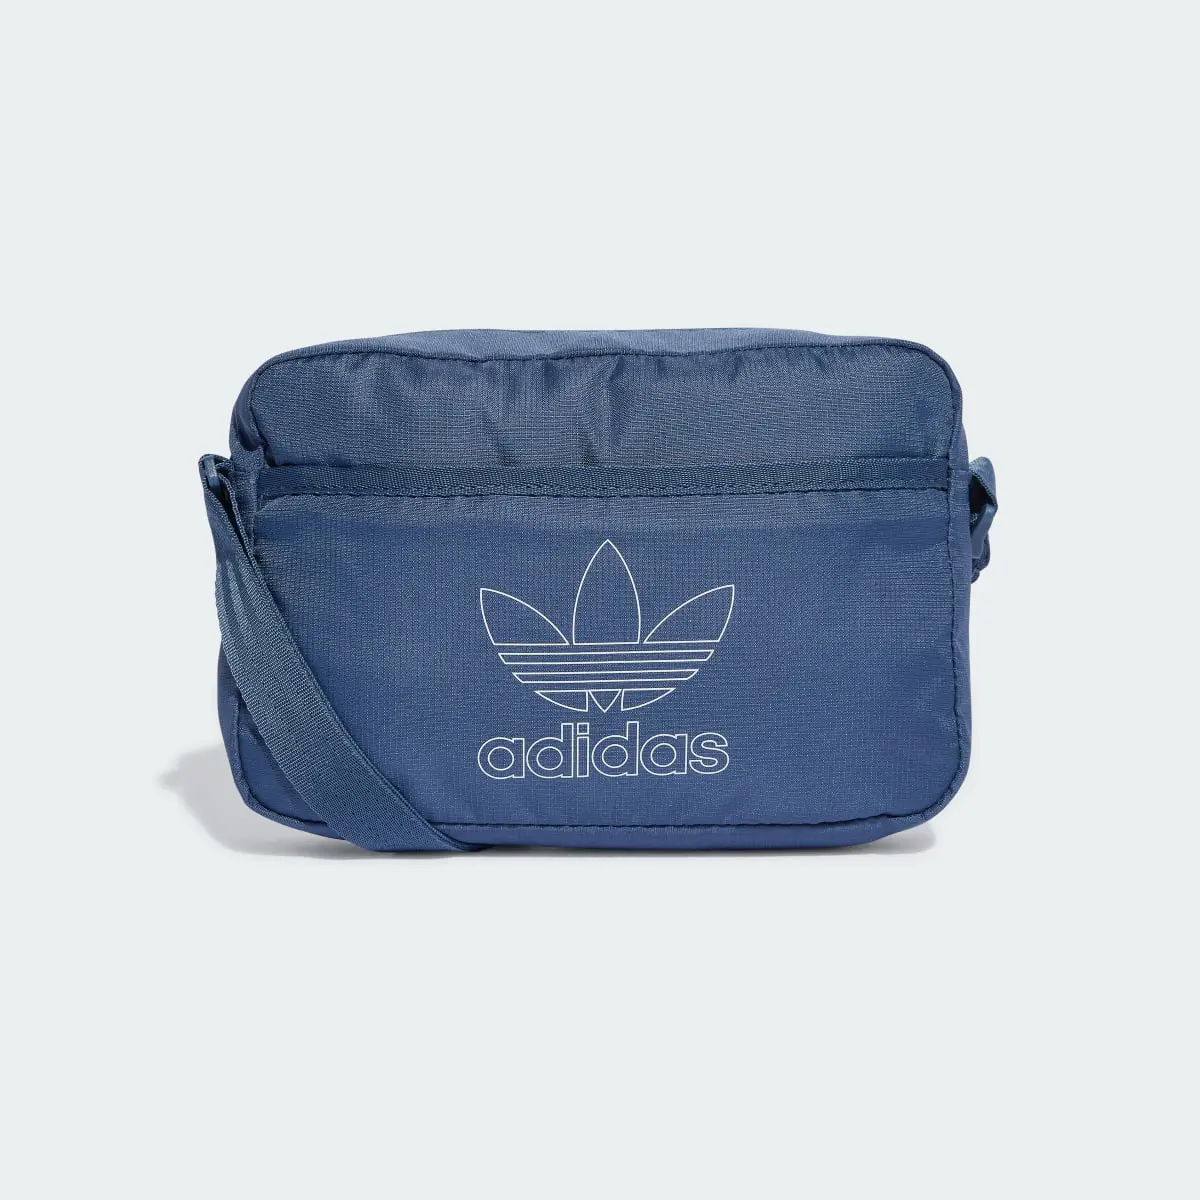 Adidas Bolso Small Airliner. 1